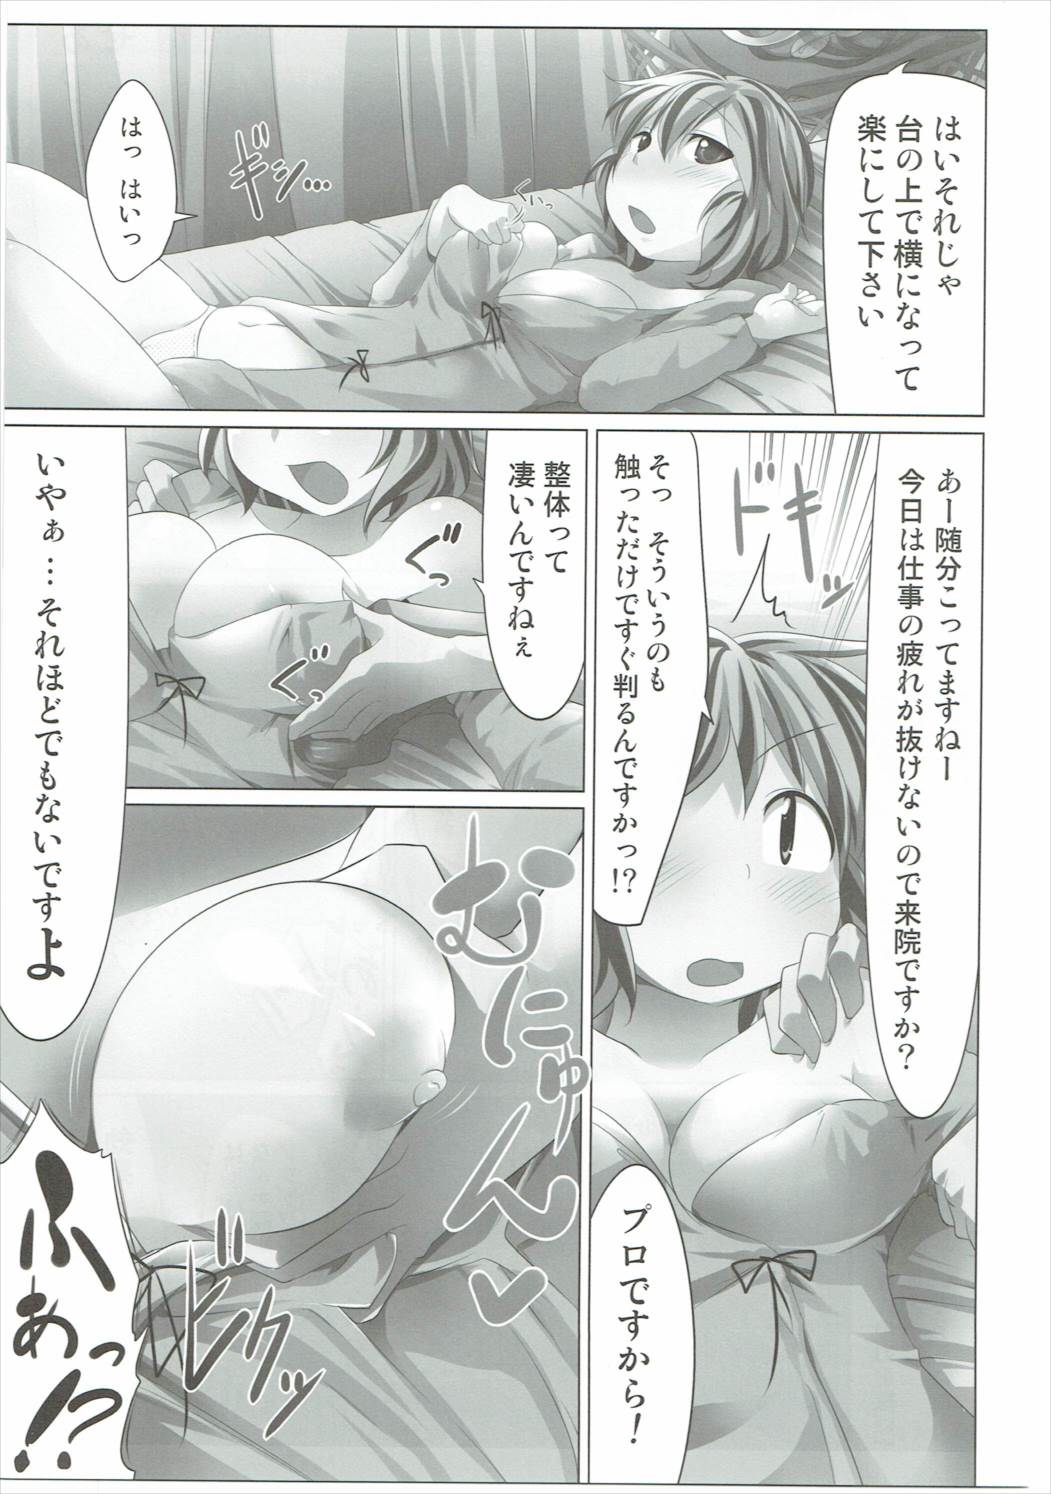 (C87) [Akikaze Asparagus, RPG COMPANY 2 (Aki)] Have Patience! (Touhou Project) page 32 full